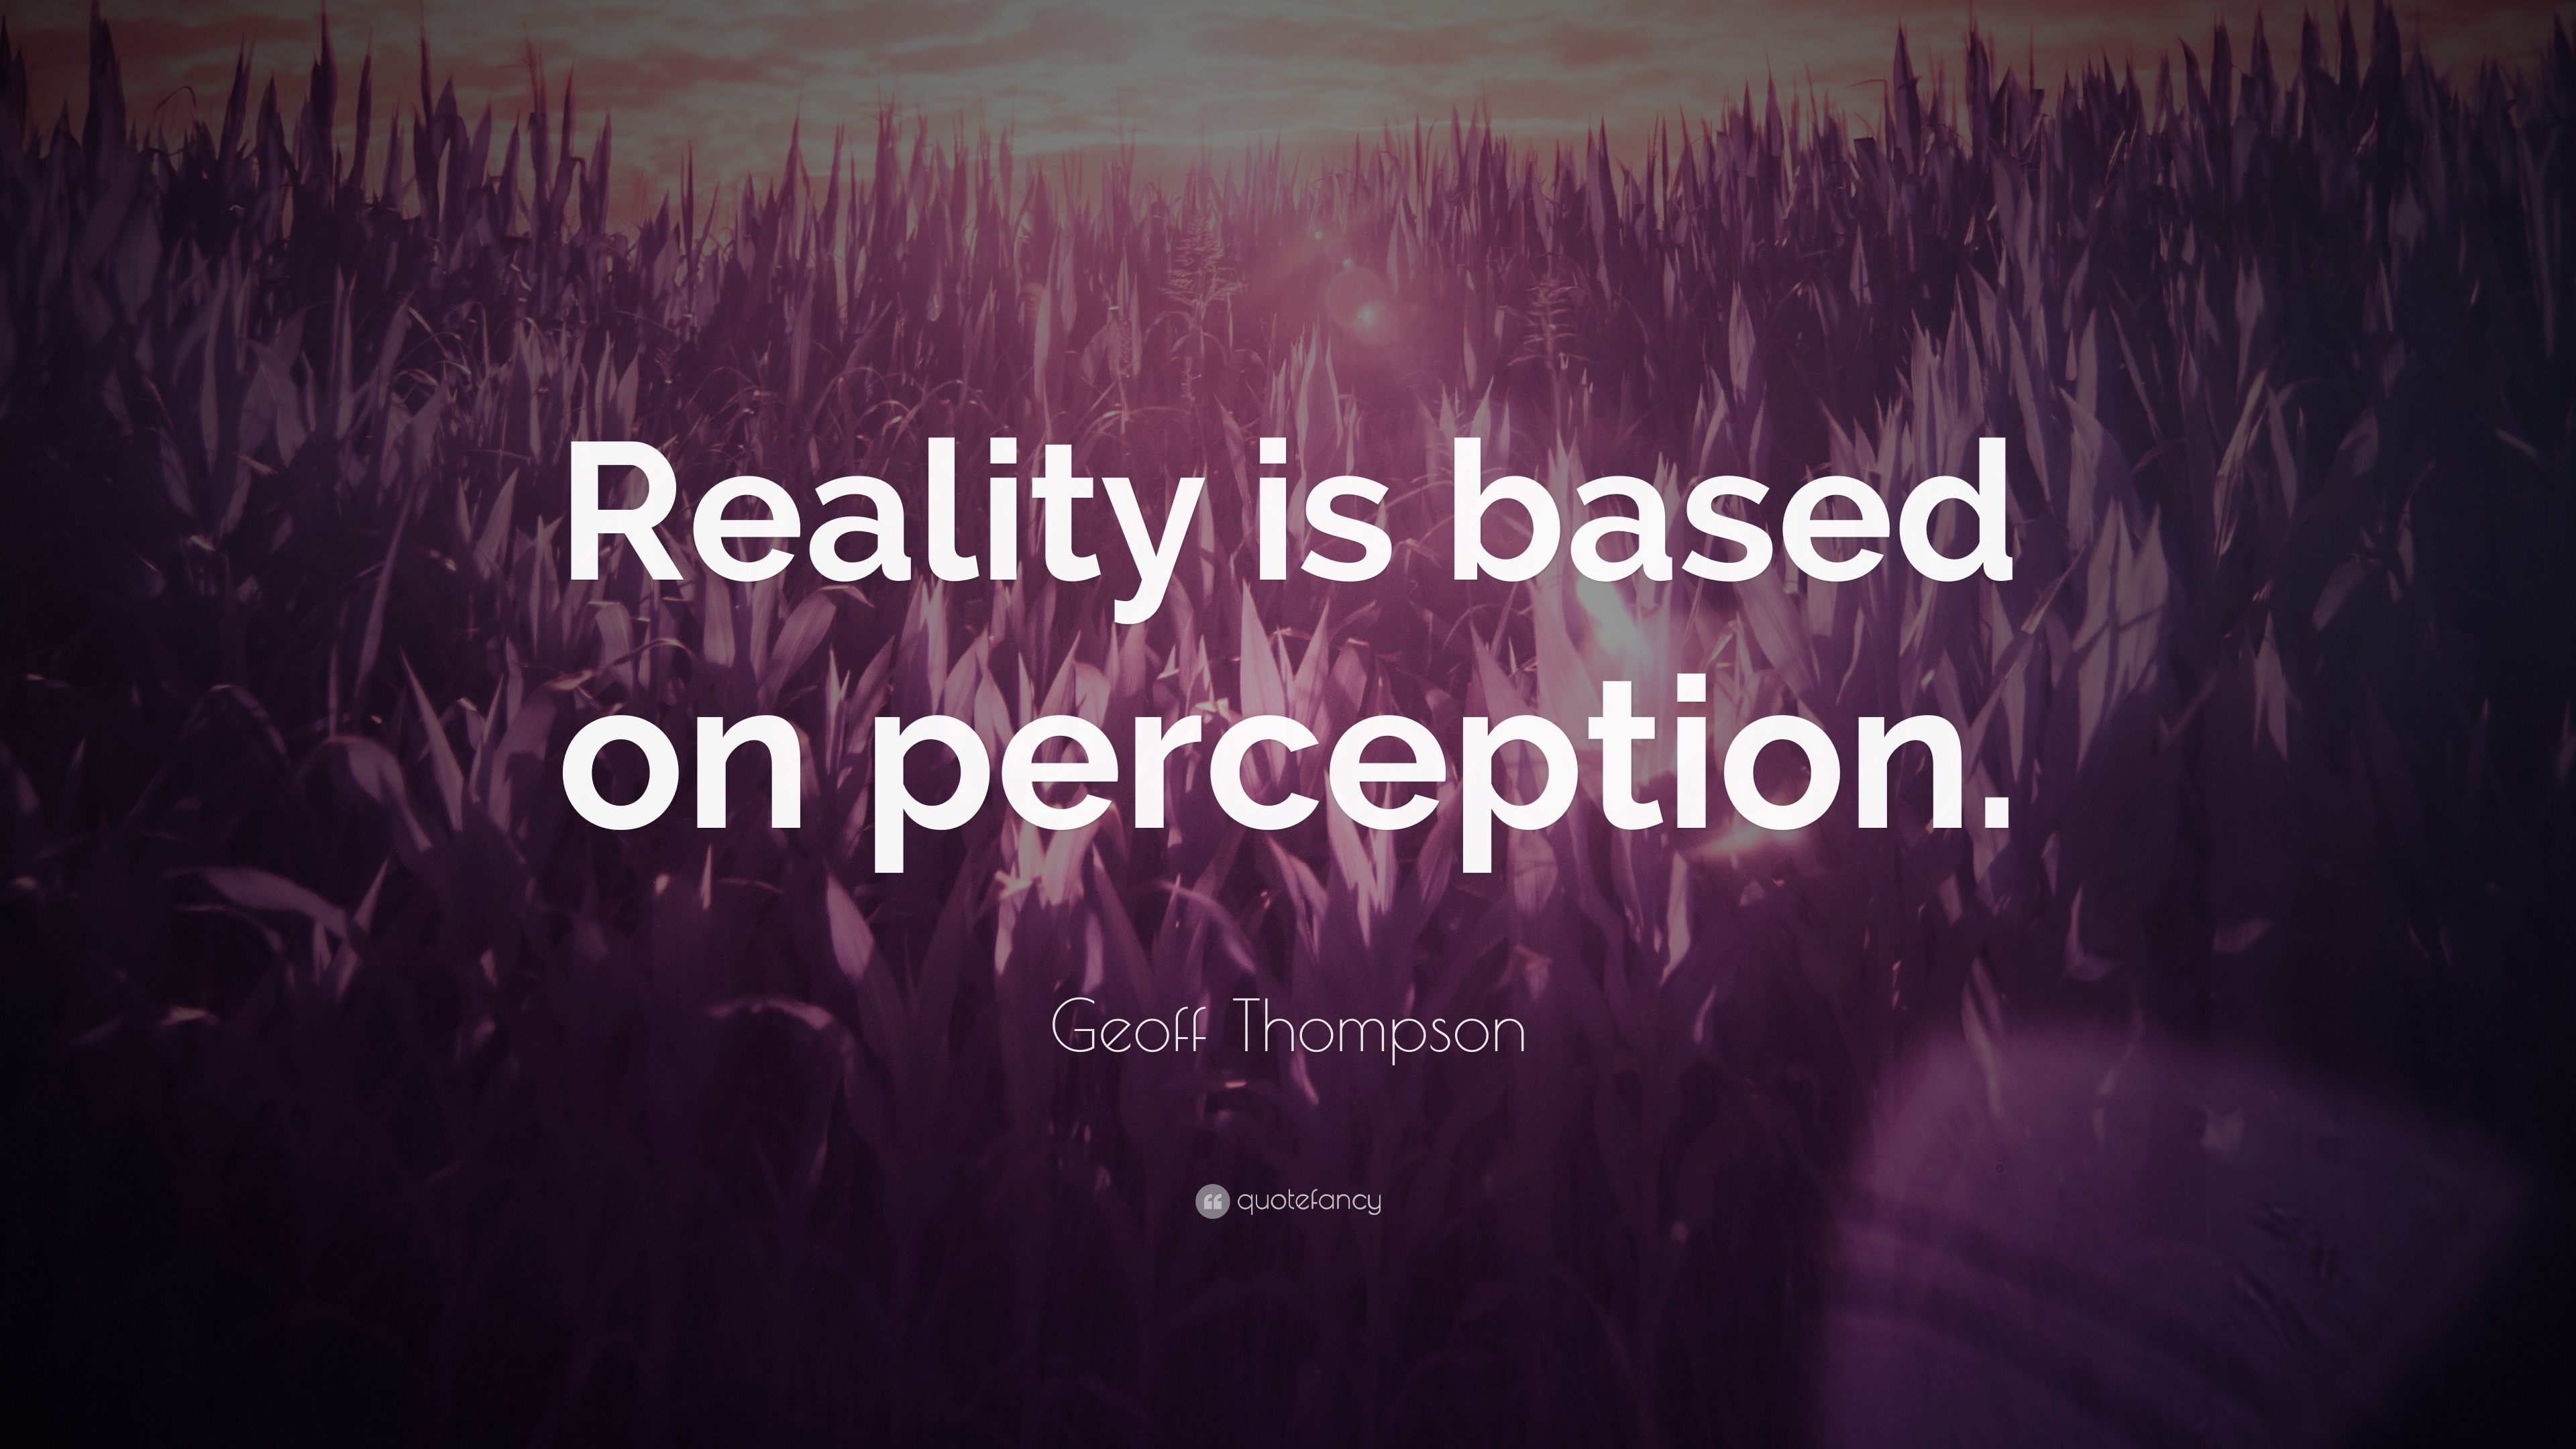 Reality Quotes About Perception - Cocharity